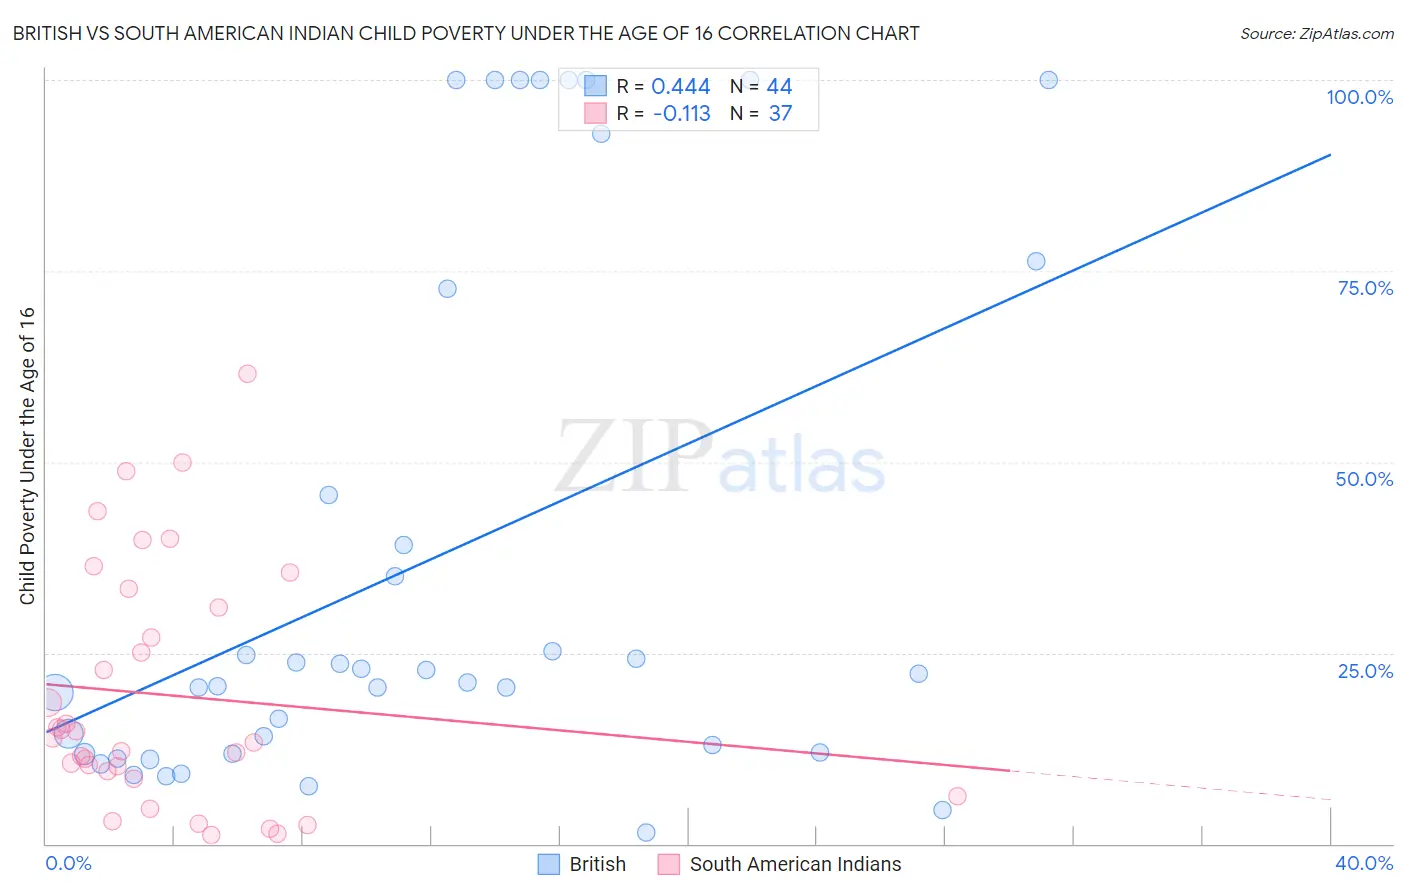 British vs South American Indian Child Poverty Under the Age of 16